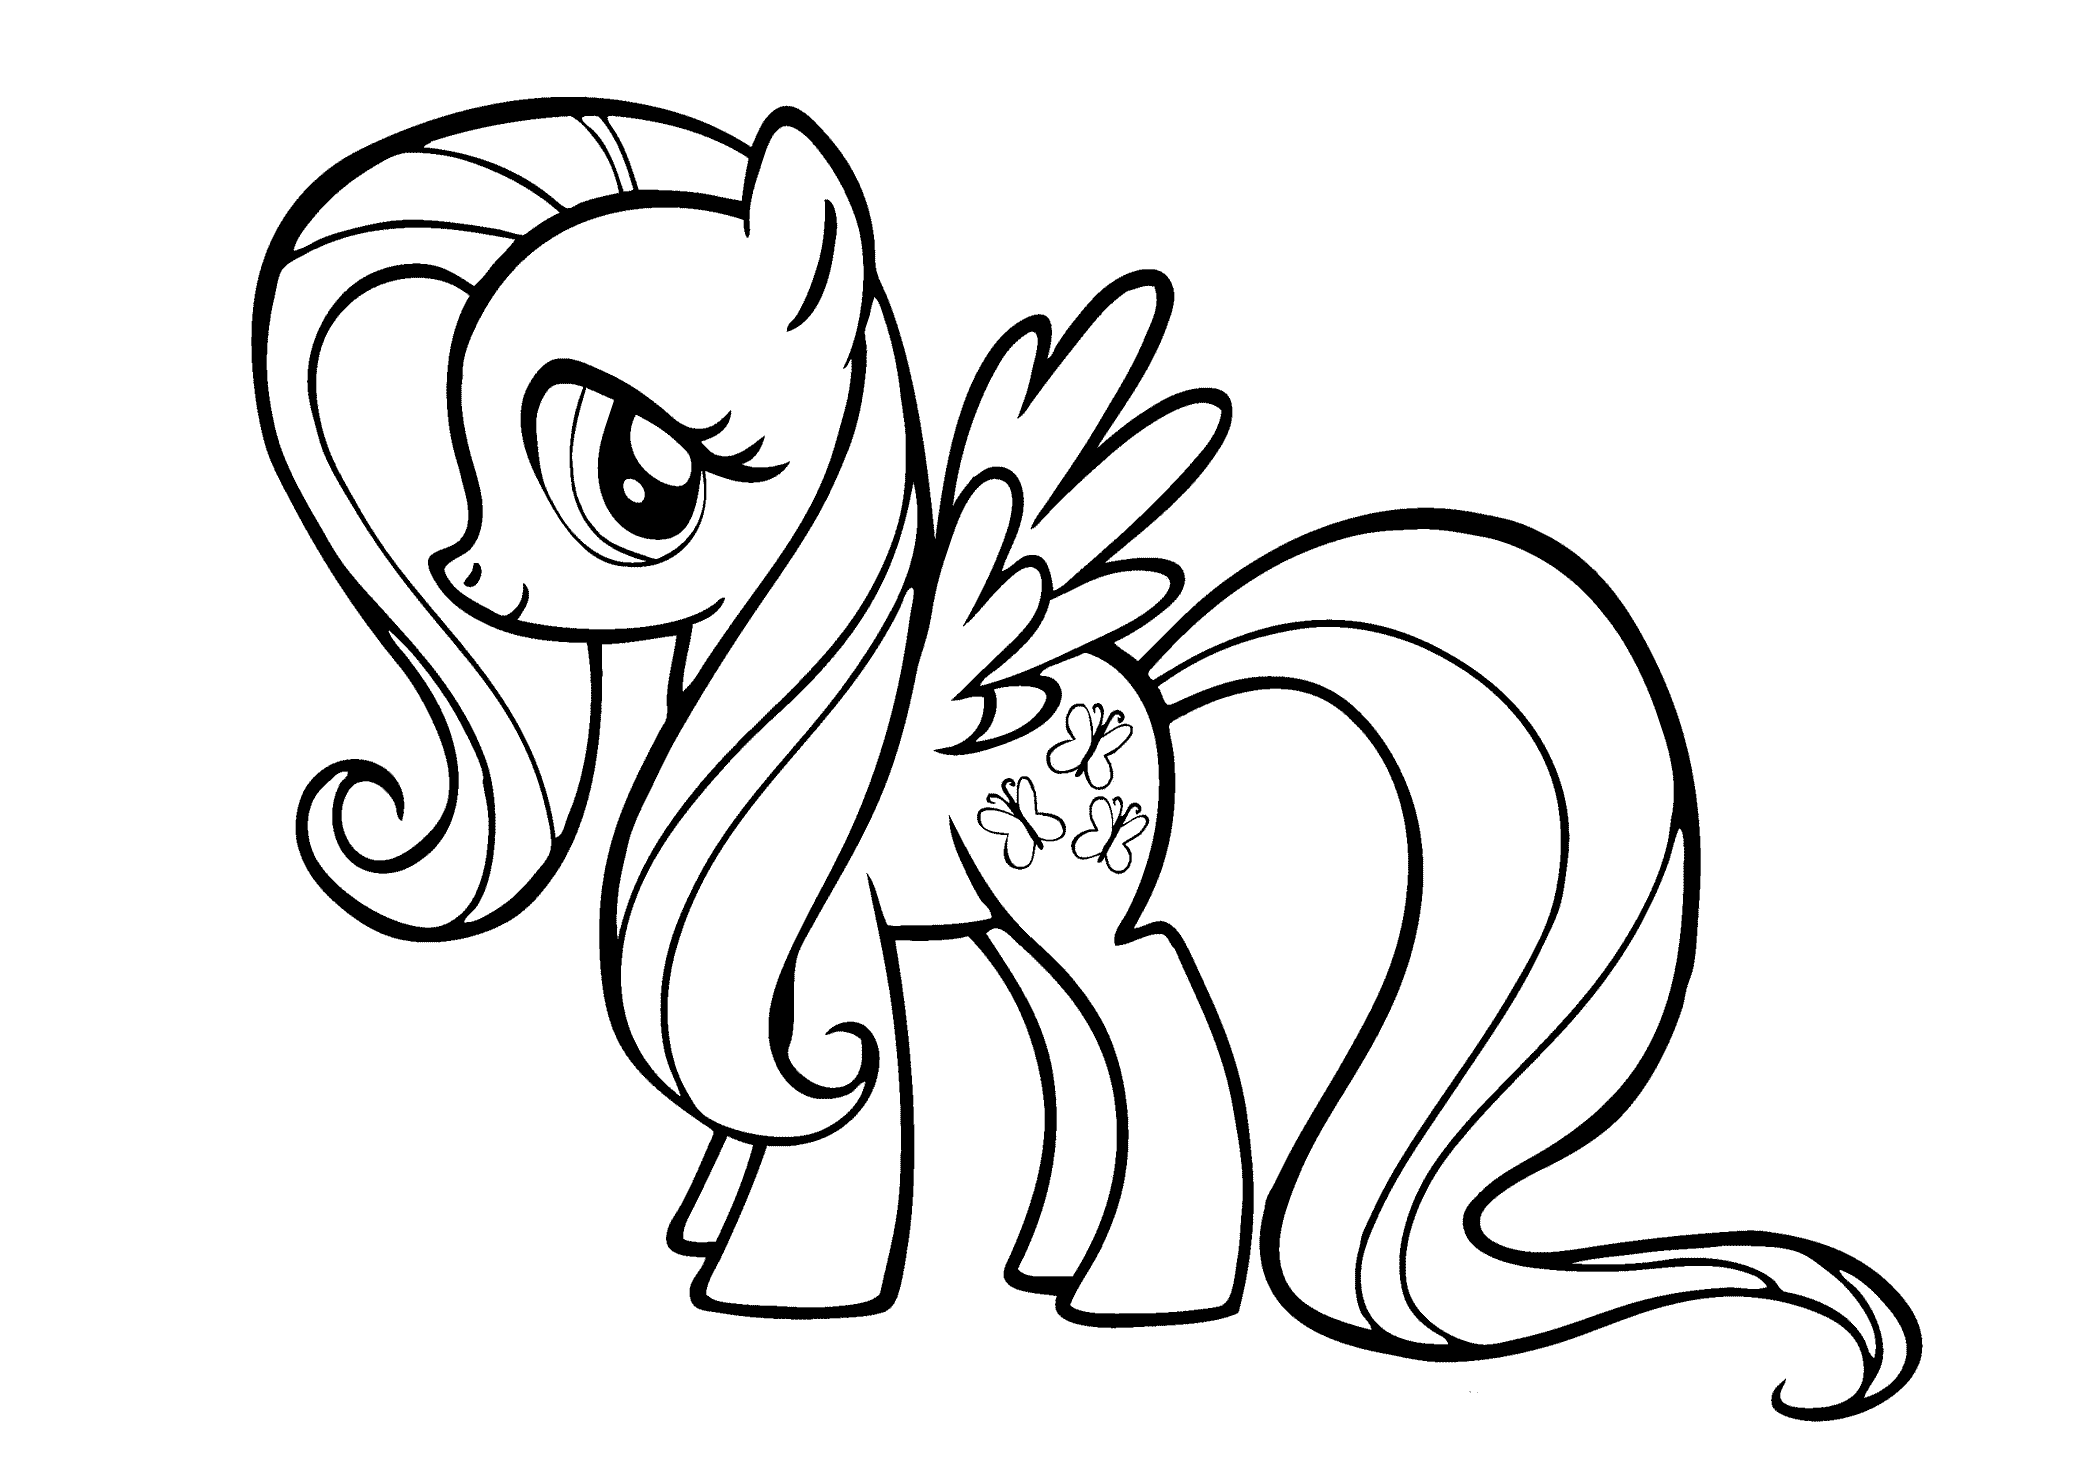 Fluttershy Coloring Page